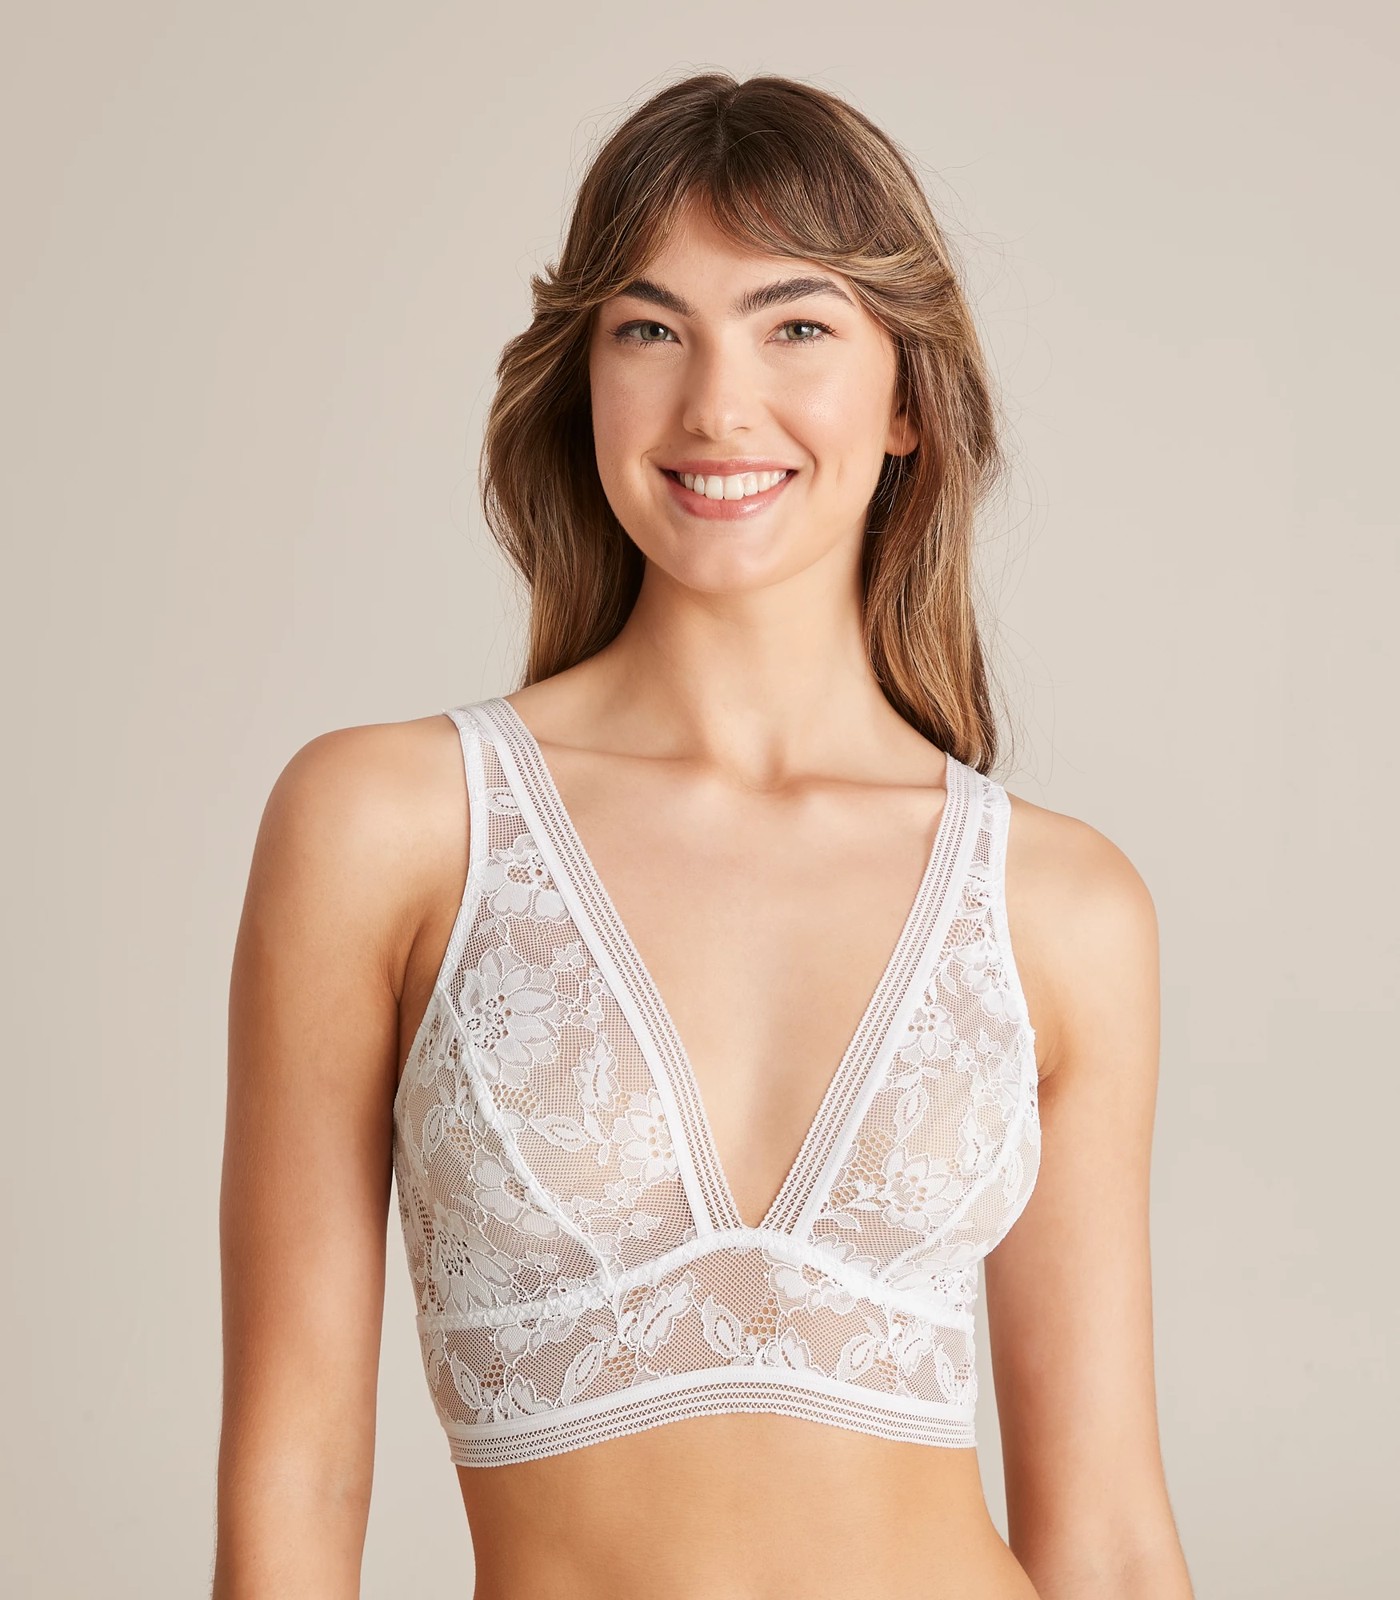 Shop Recycled Lace Bralette online